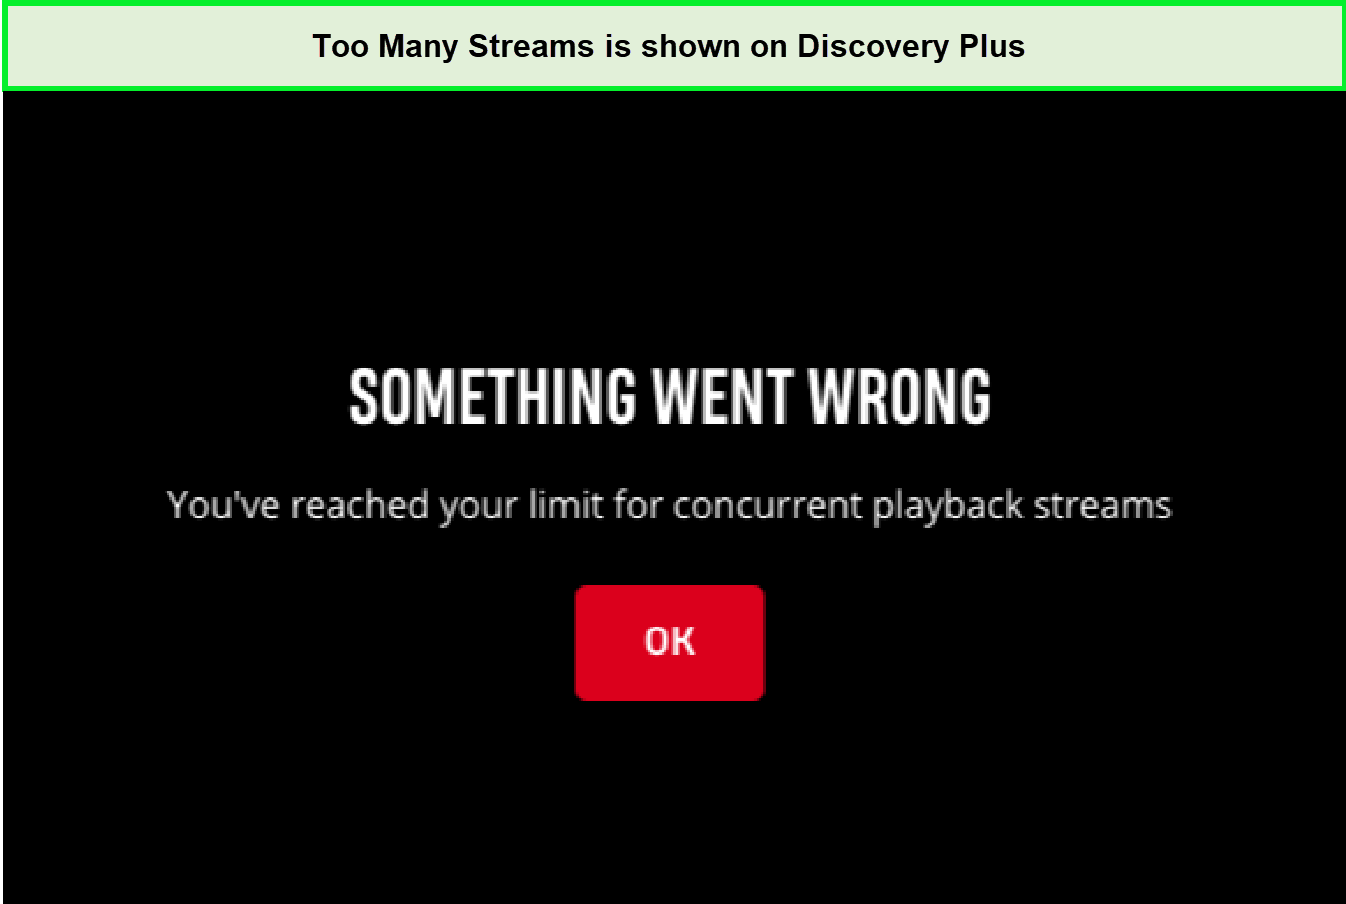 discovery-plus-too-many-streams-error-in-South Korea